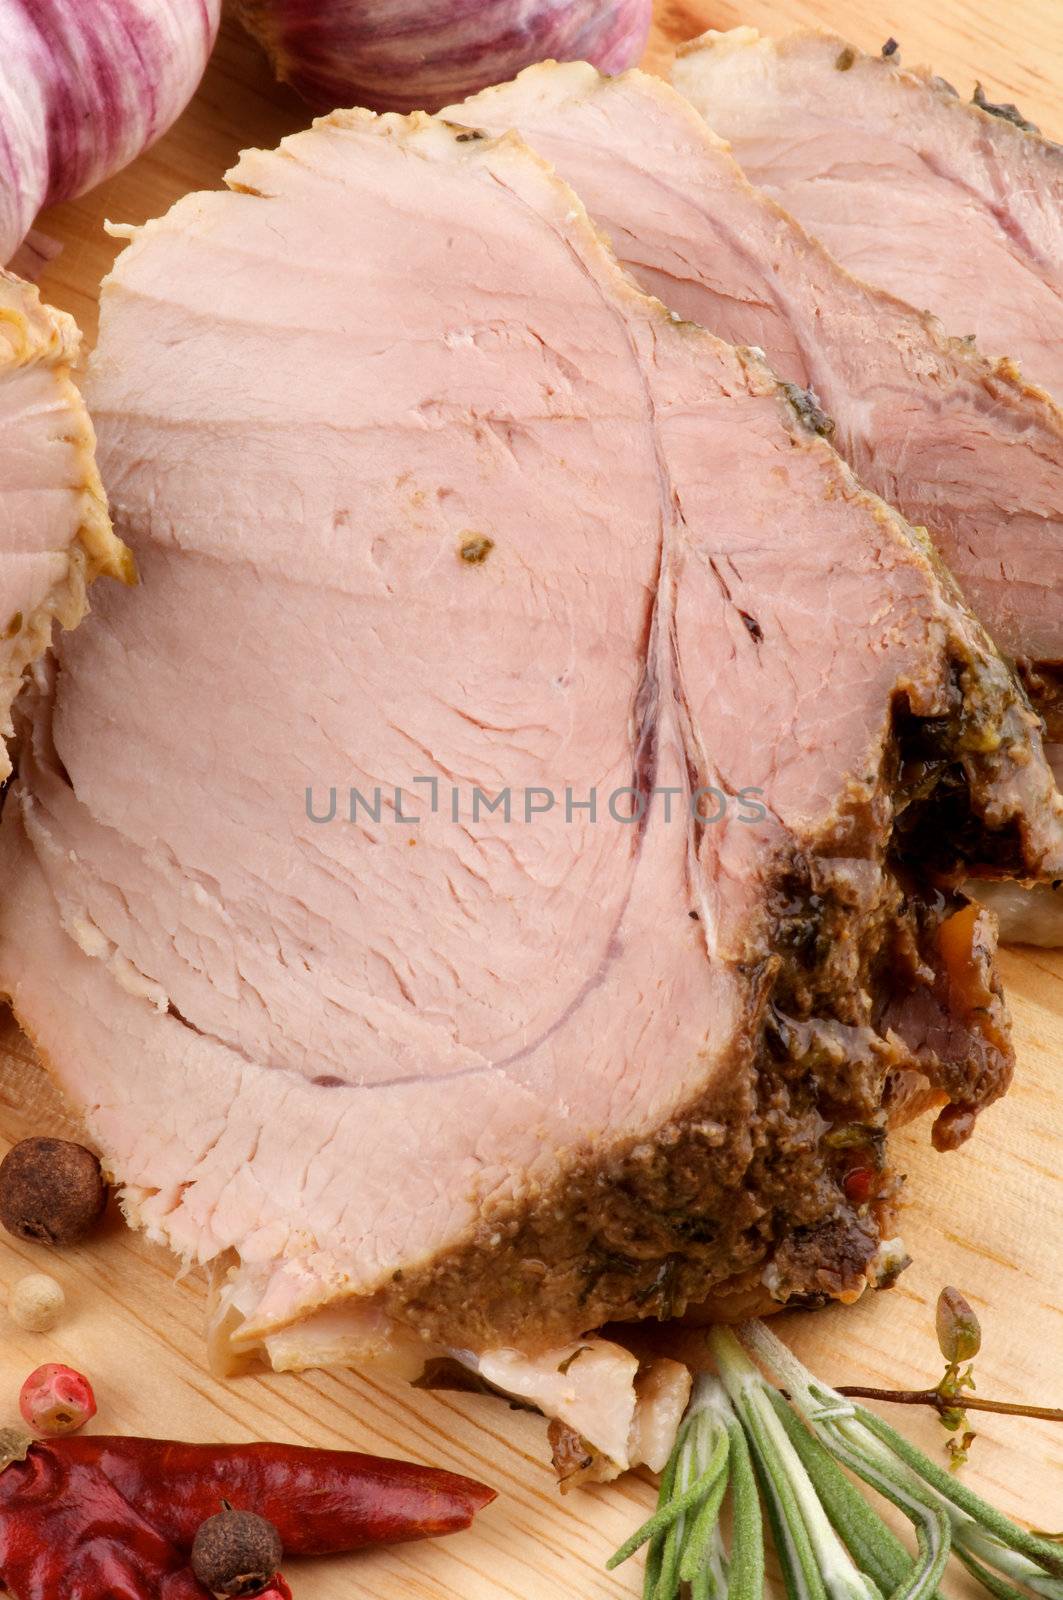 Slices of Juicy Roasted Pork with Spices, Rosemary and Garlic closeup on Cutting Board